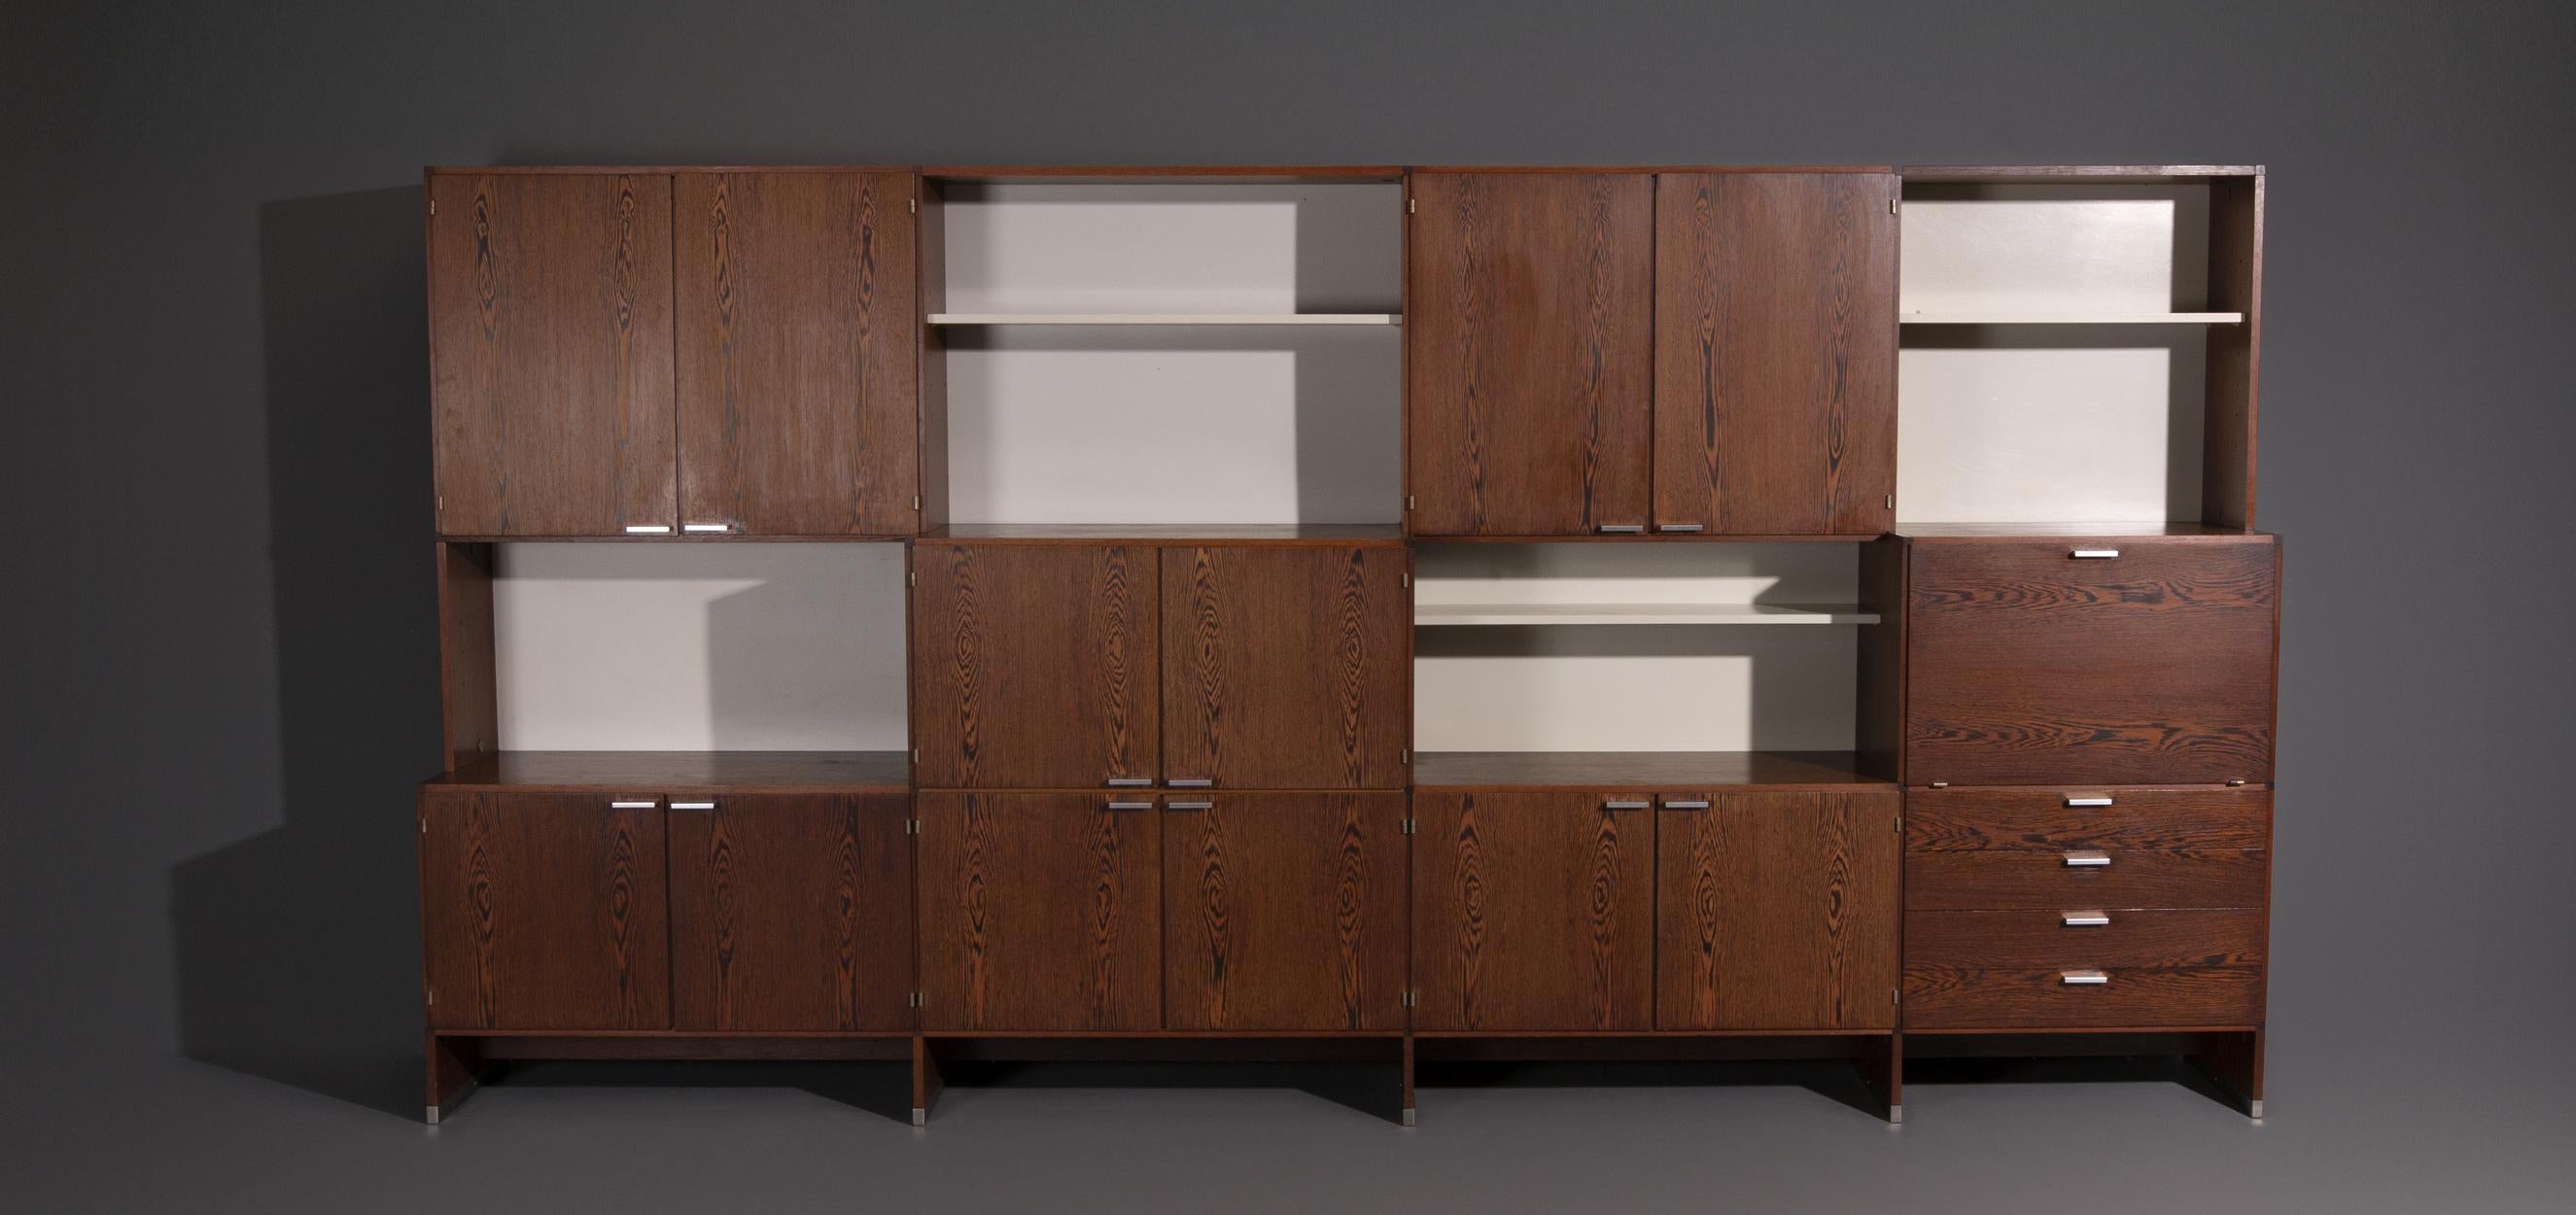 Cees Braakman wall system designed for Pastoe. Produced by Pastoe in the Netherlands, the 1950s. The cabinet is made of Wenge. Because of the cabinets and shelves, the wall system has enough storage space but also enough room to exhibit your special